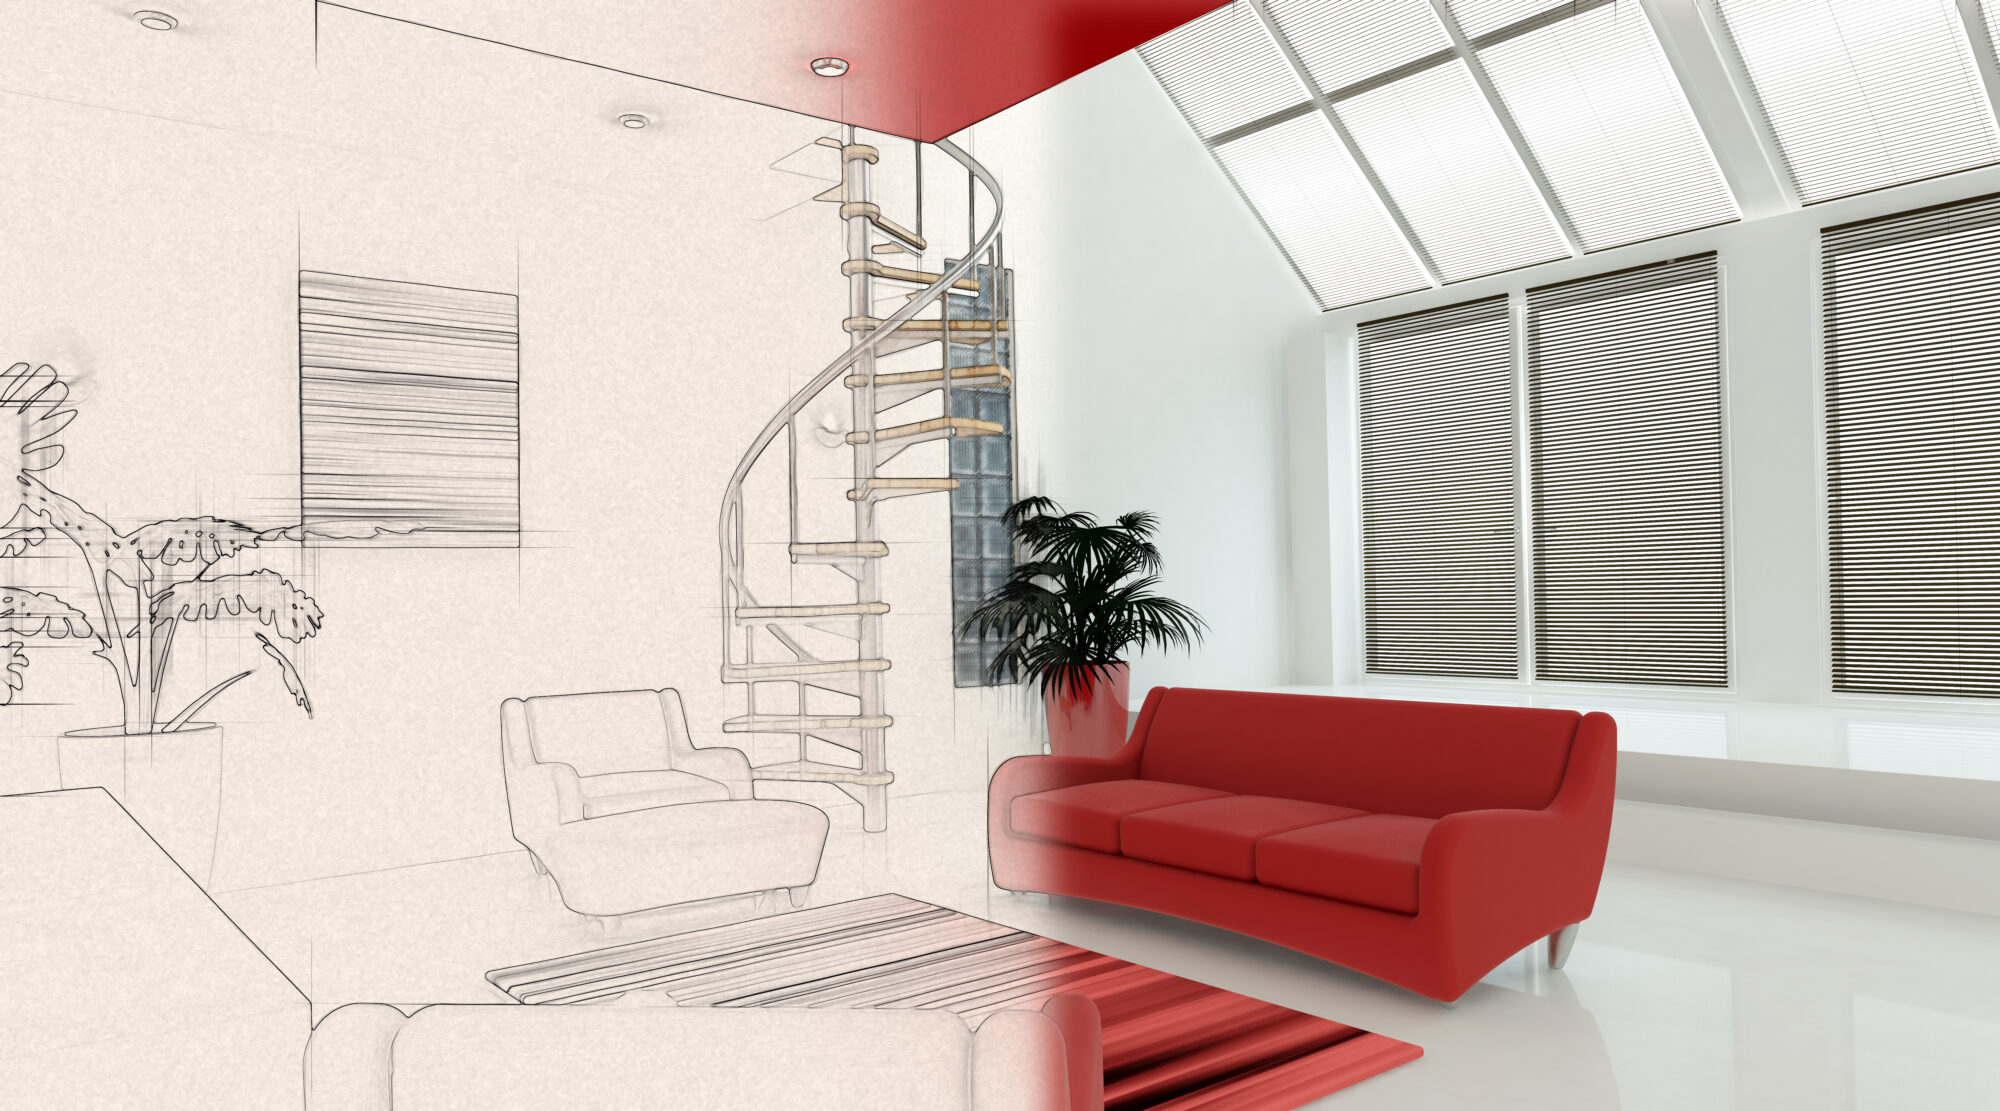 3D Interior With Half In Sketch Phase